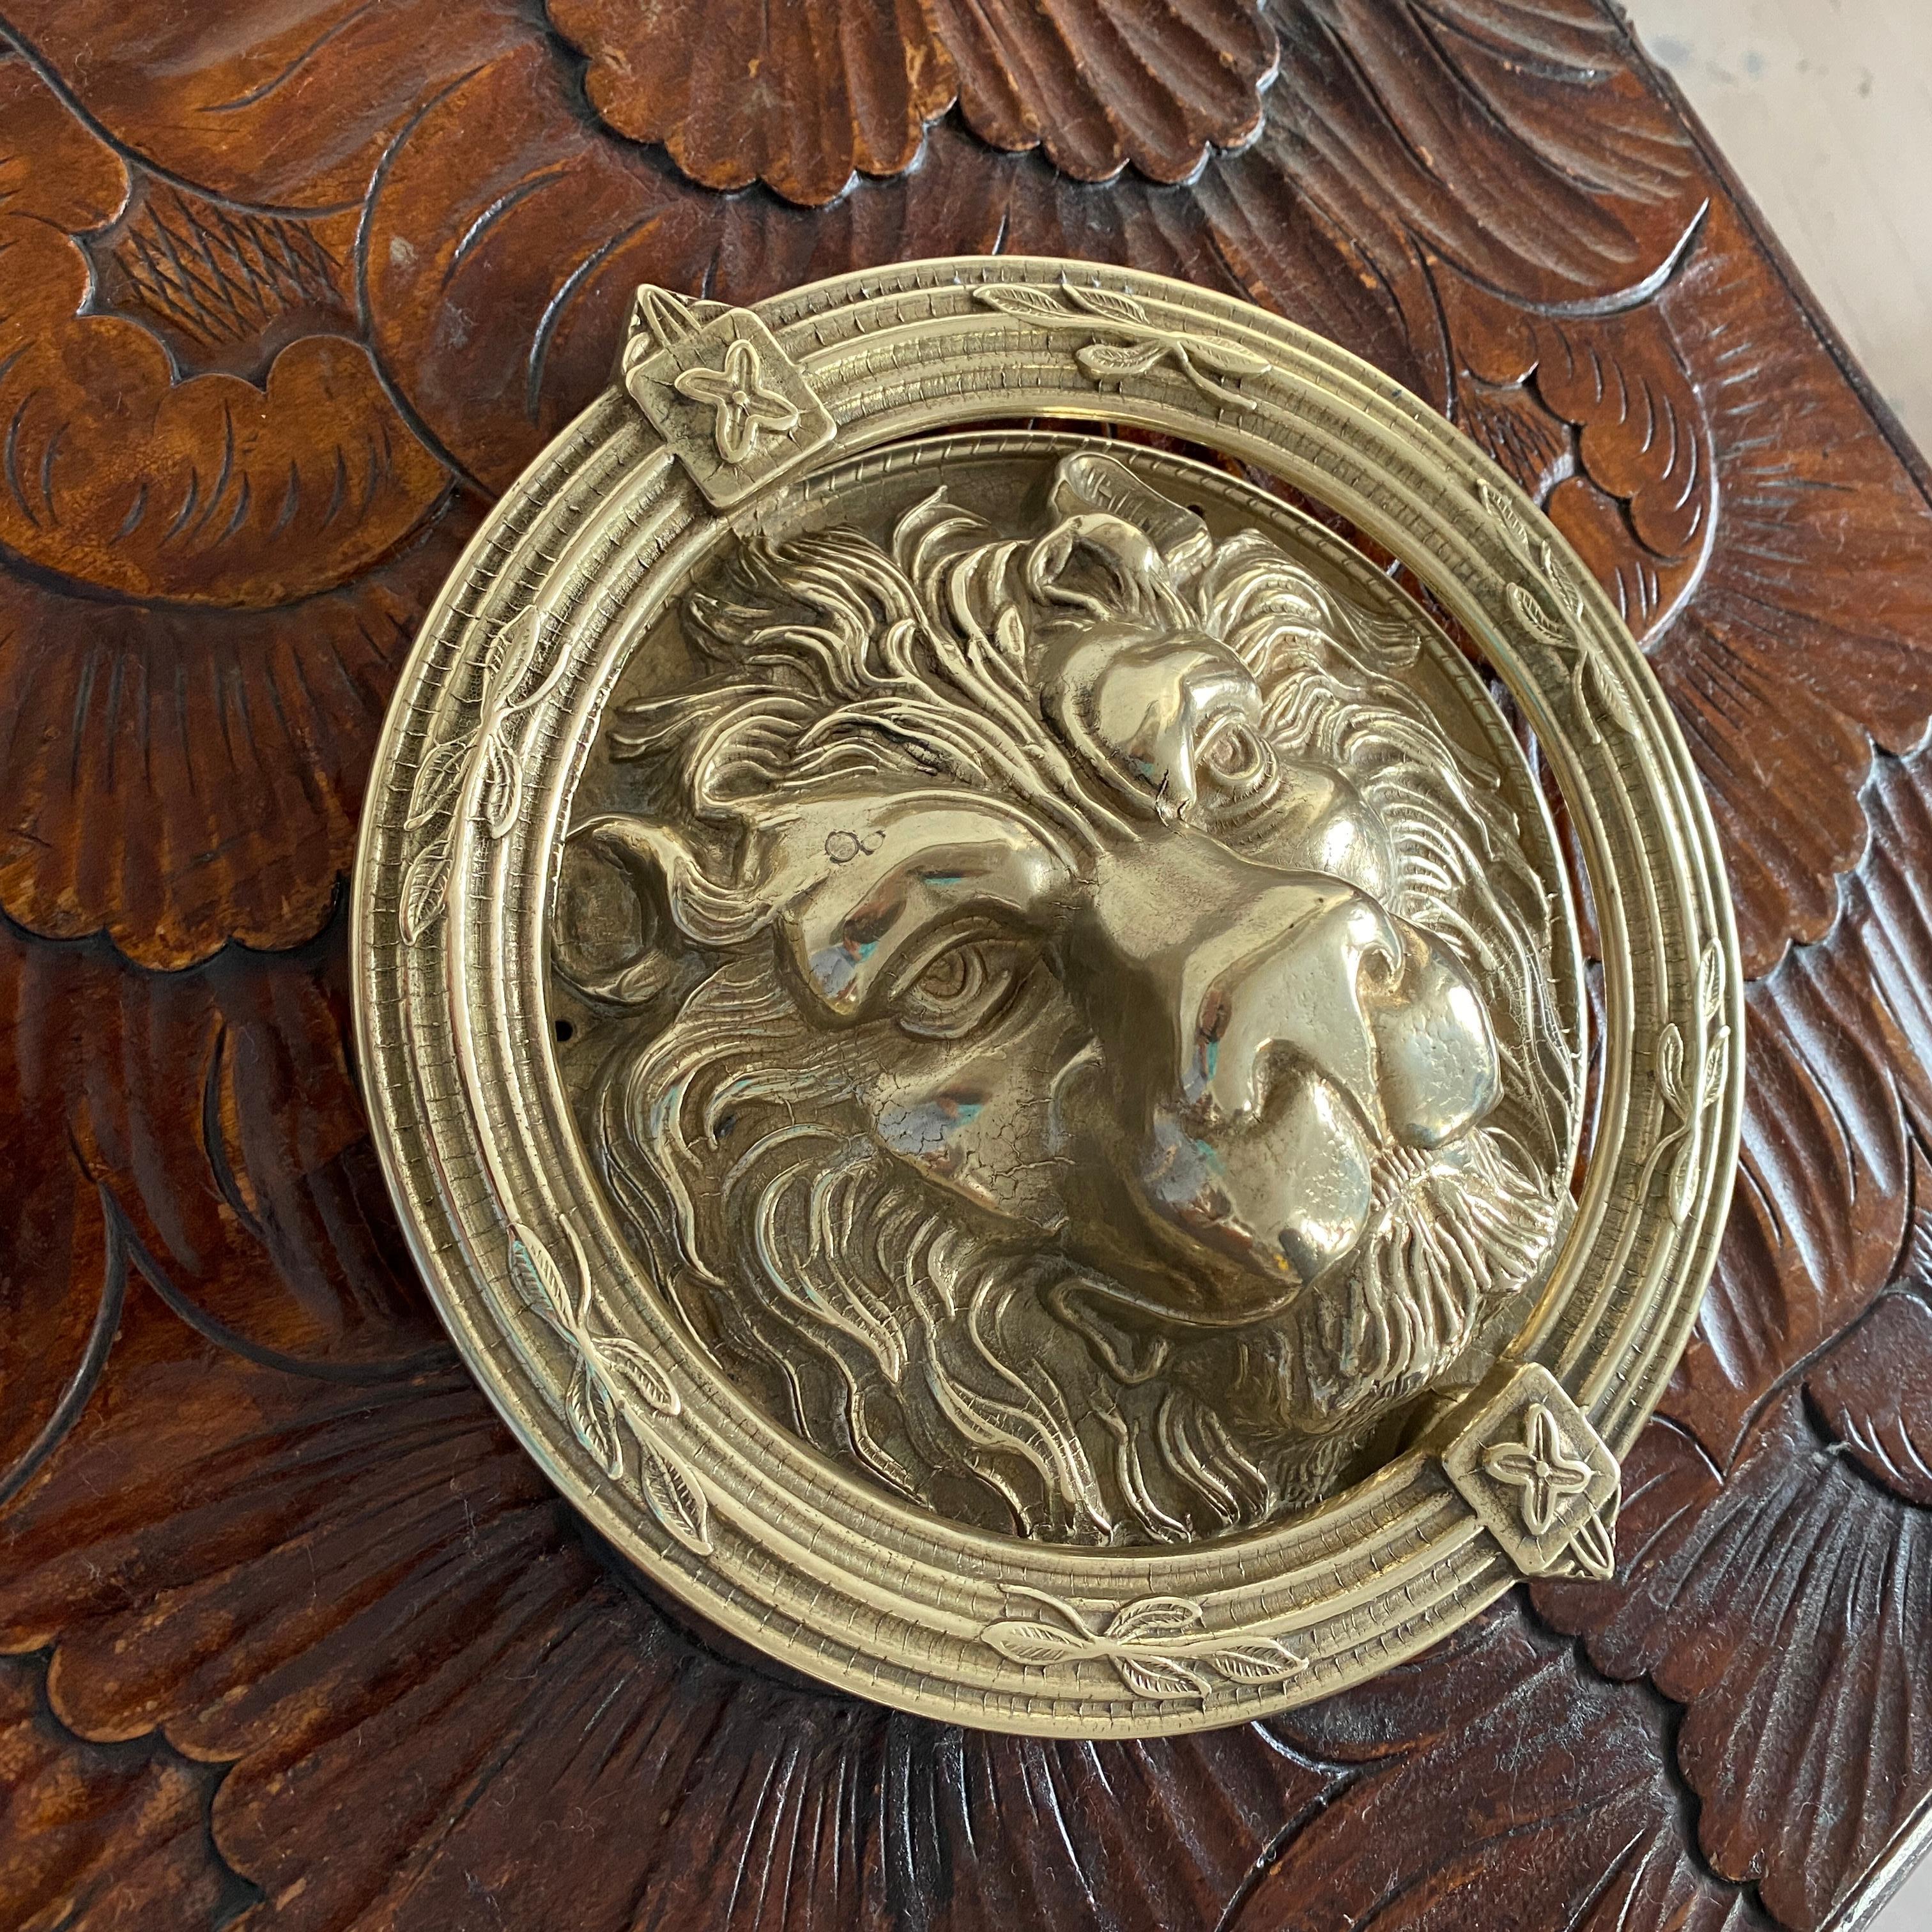 A very large and heavy English brass door knocker in the shape of a Lion's head. 